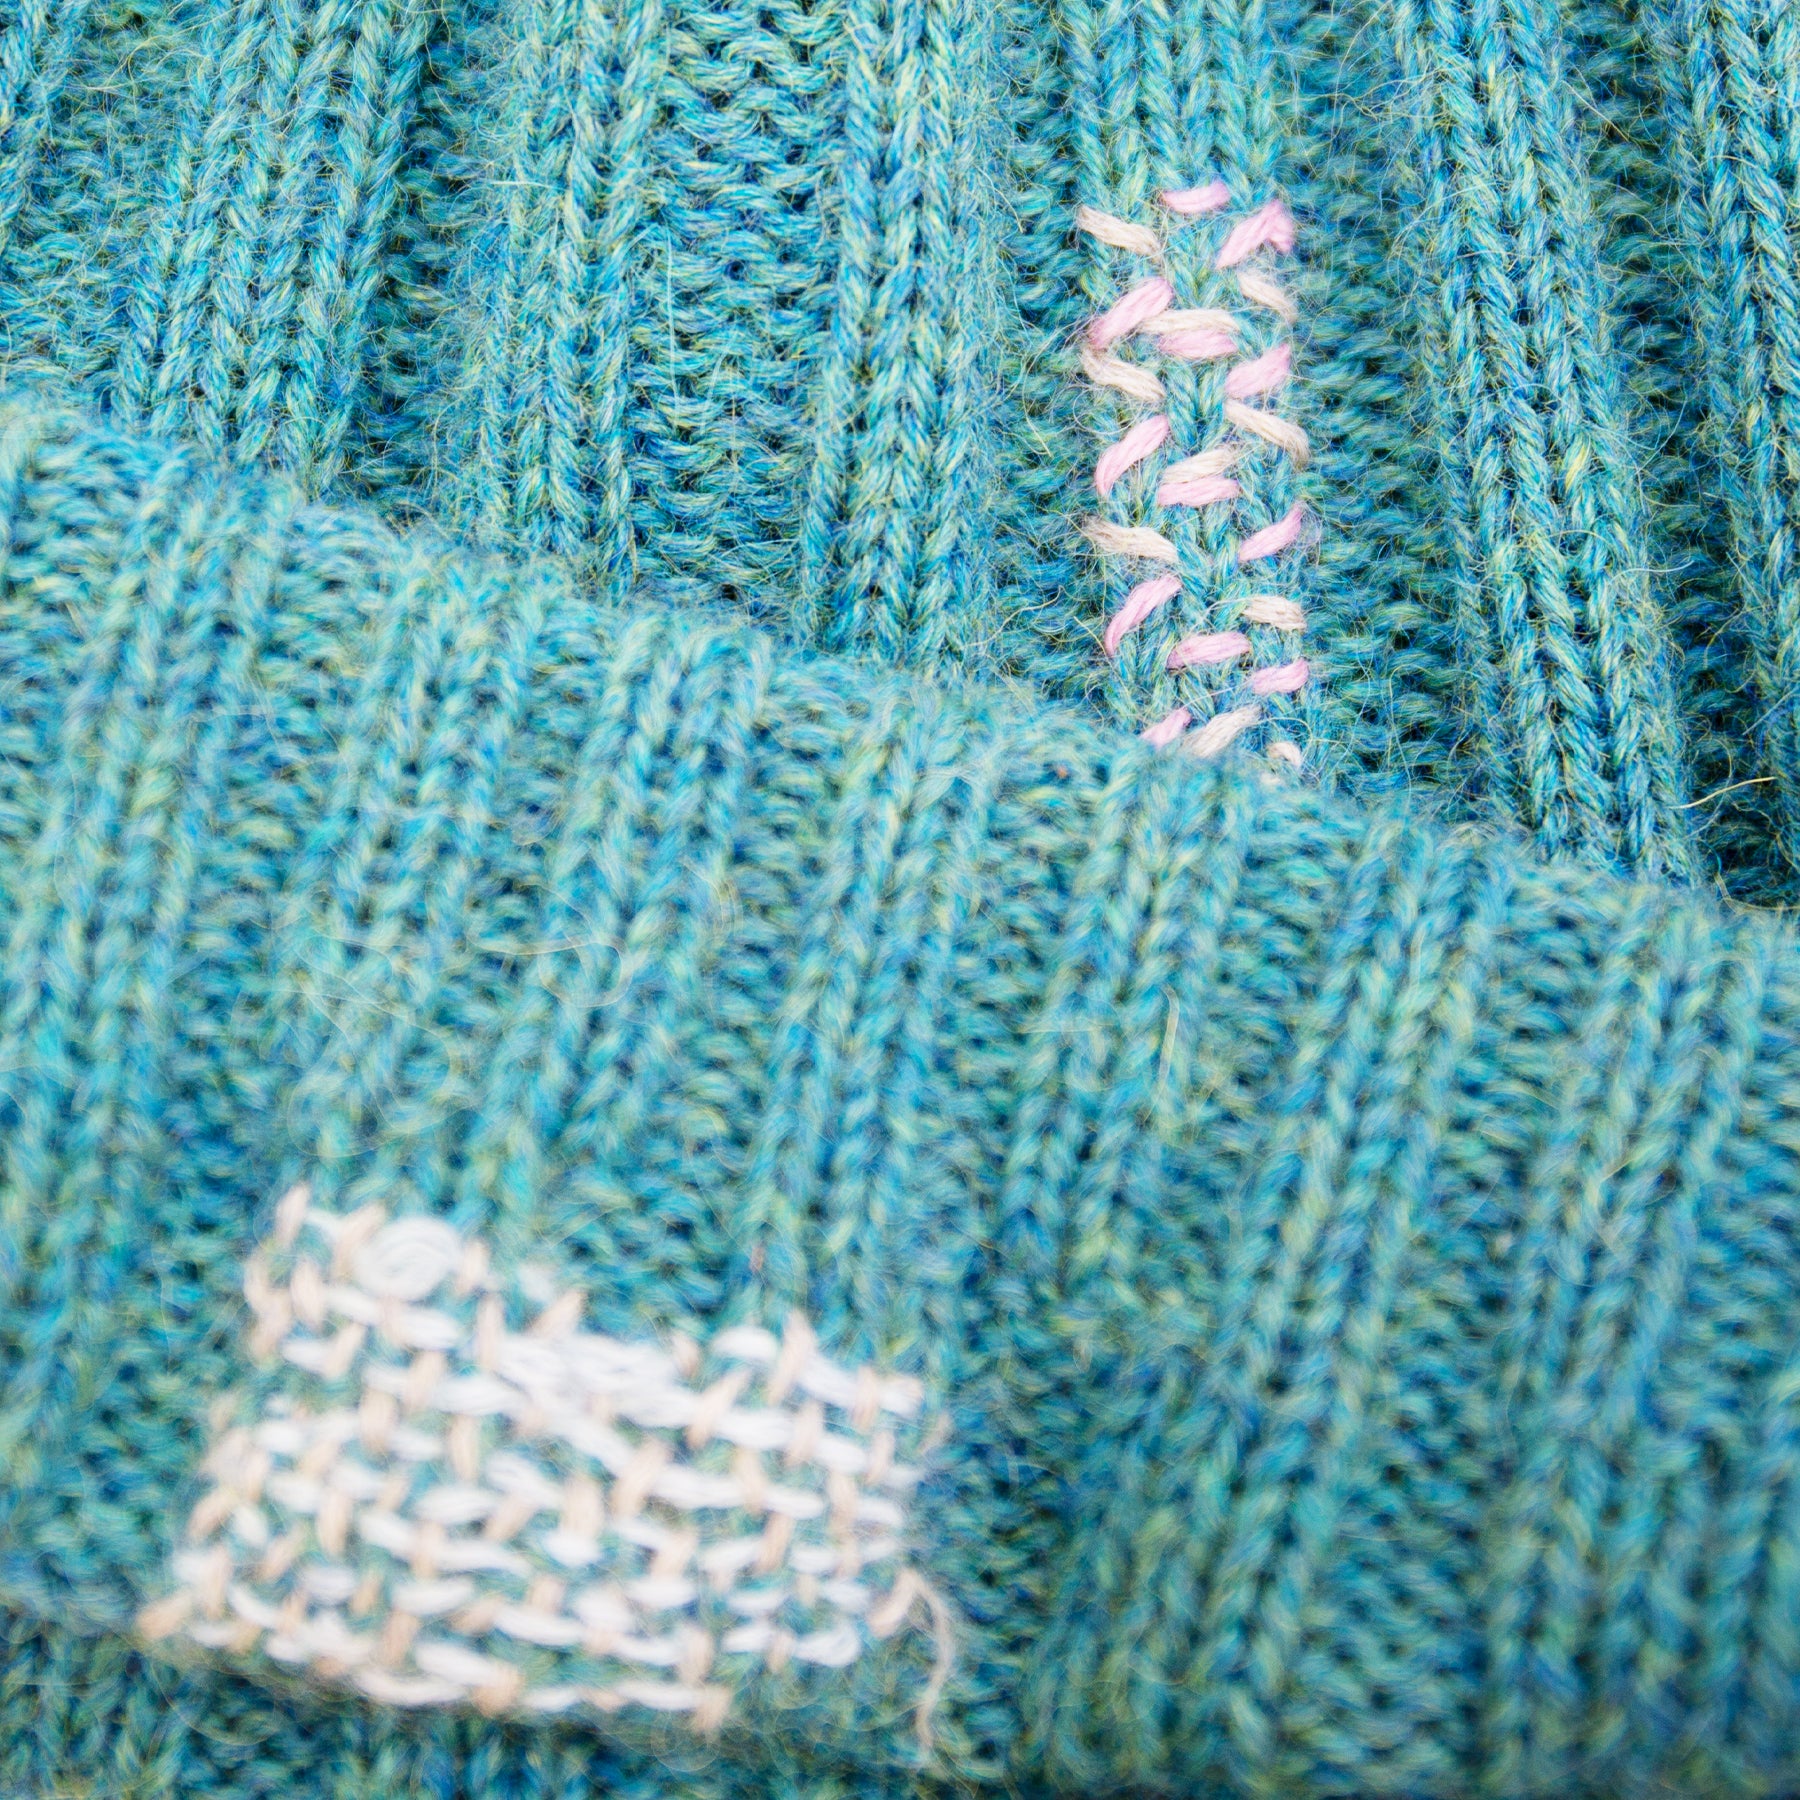 100% Baby Alpaca wool ribbed beanie in Pacific Ocean Blue  Multicolored hand-embroidered mending  Made in Los Angeles